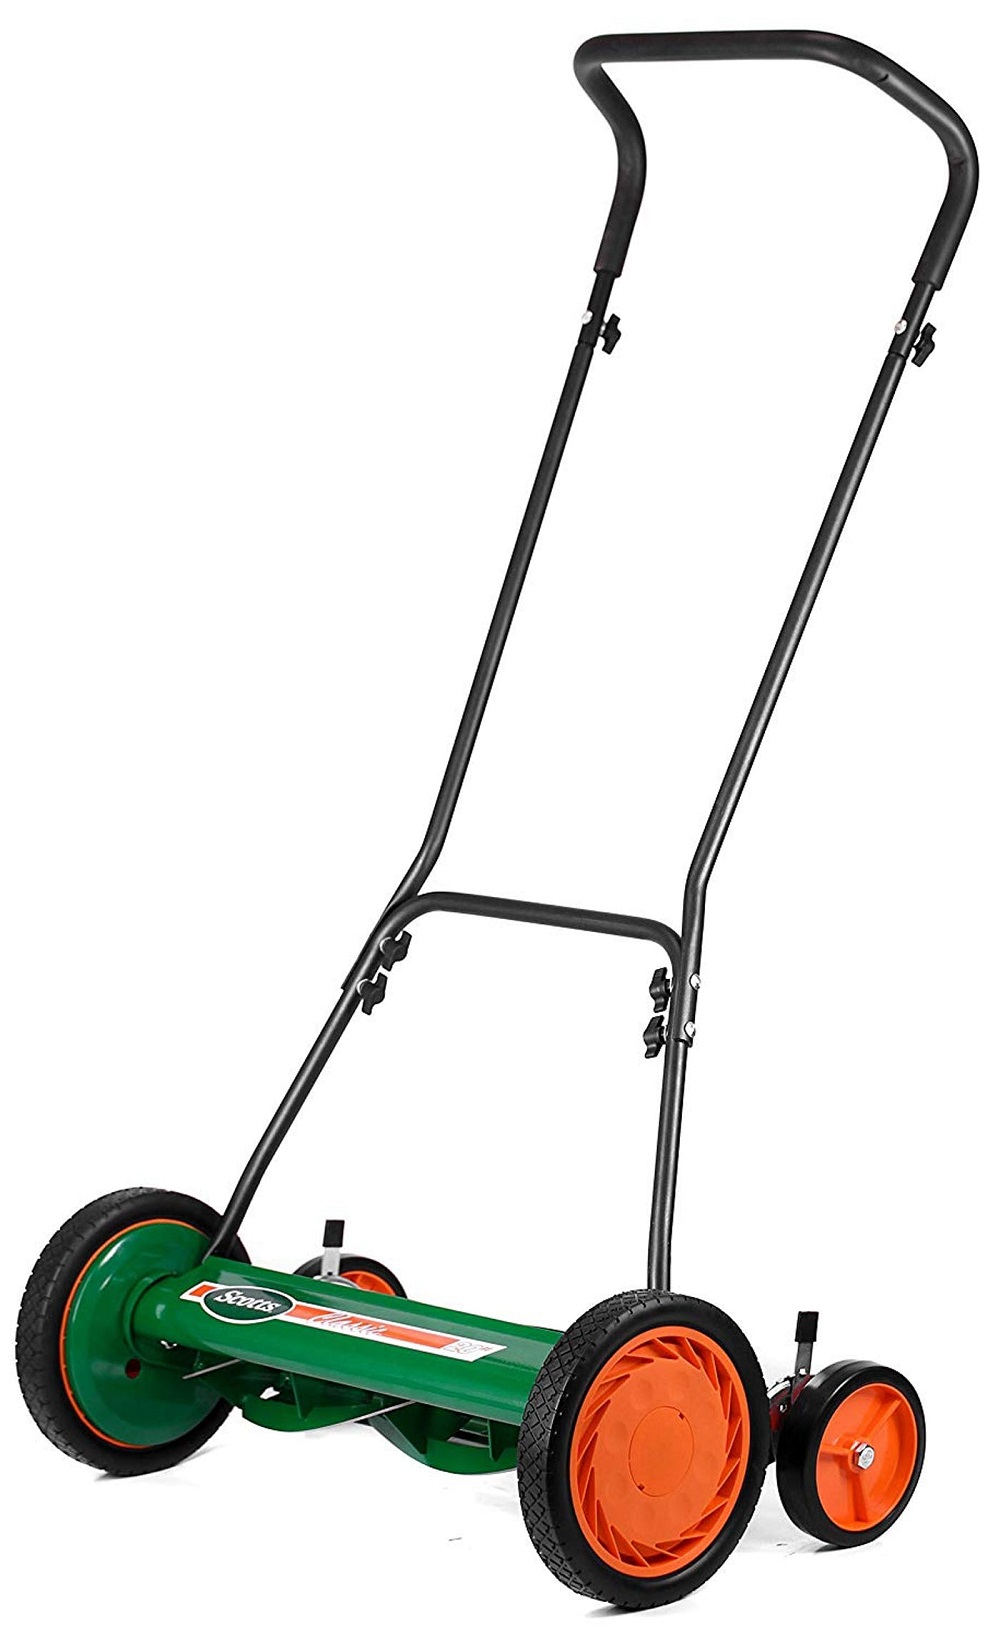 lw1 Small lawn mower options that you can buy online